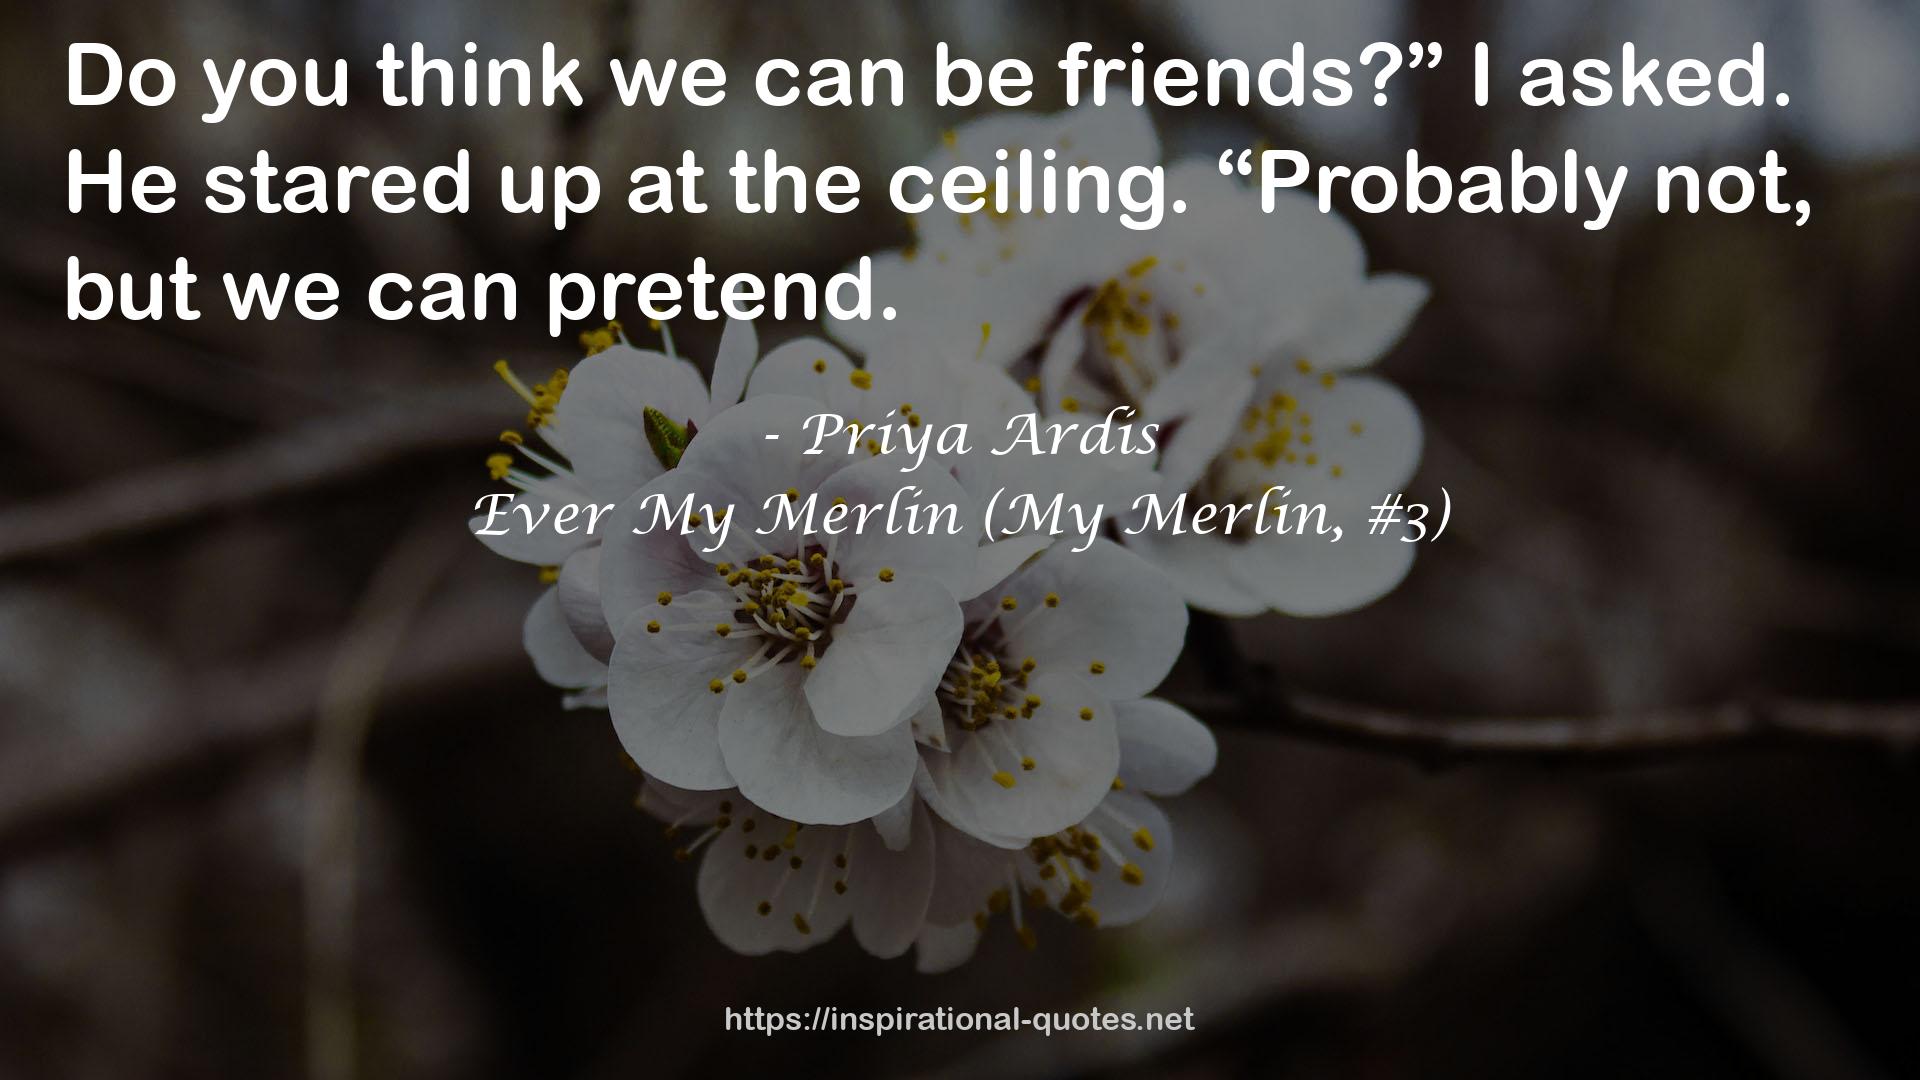 Ever My Merlin (My Merlin, #3) QUOTES